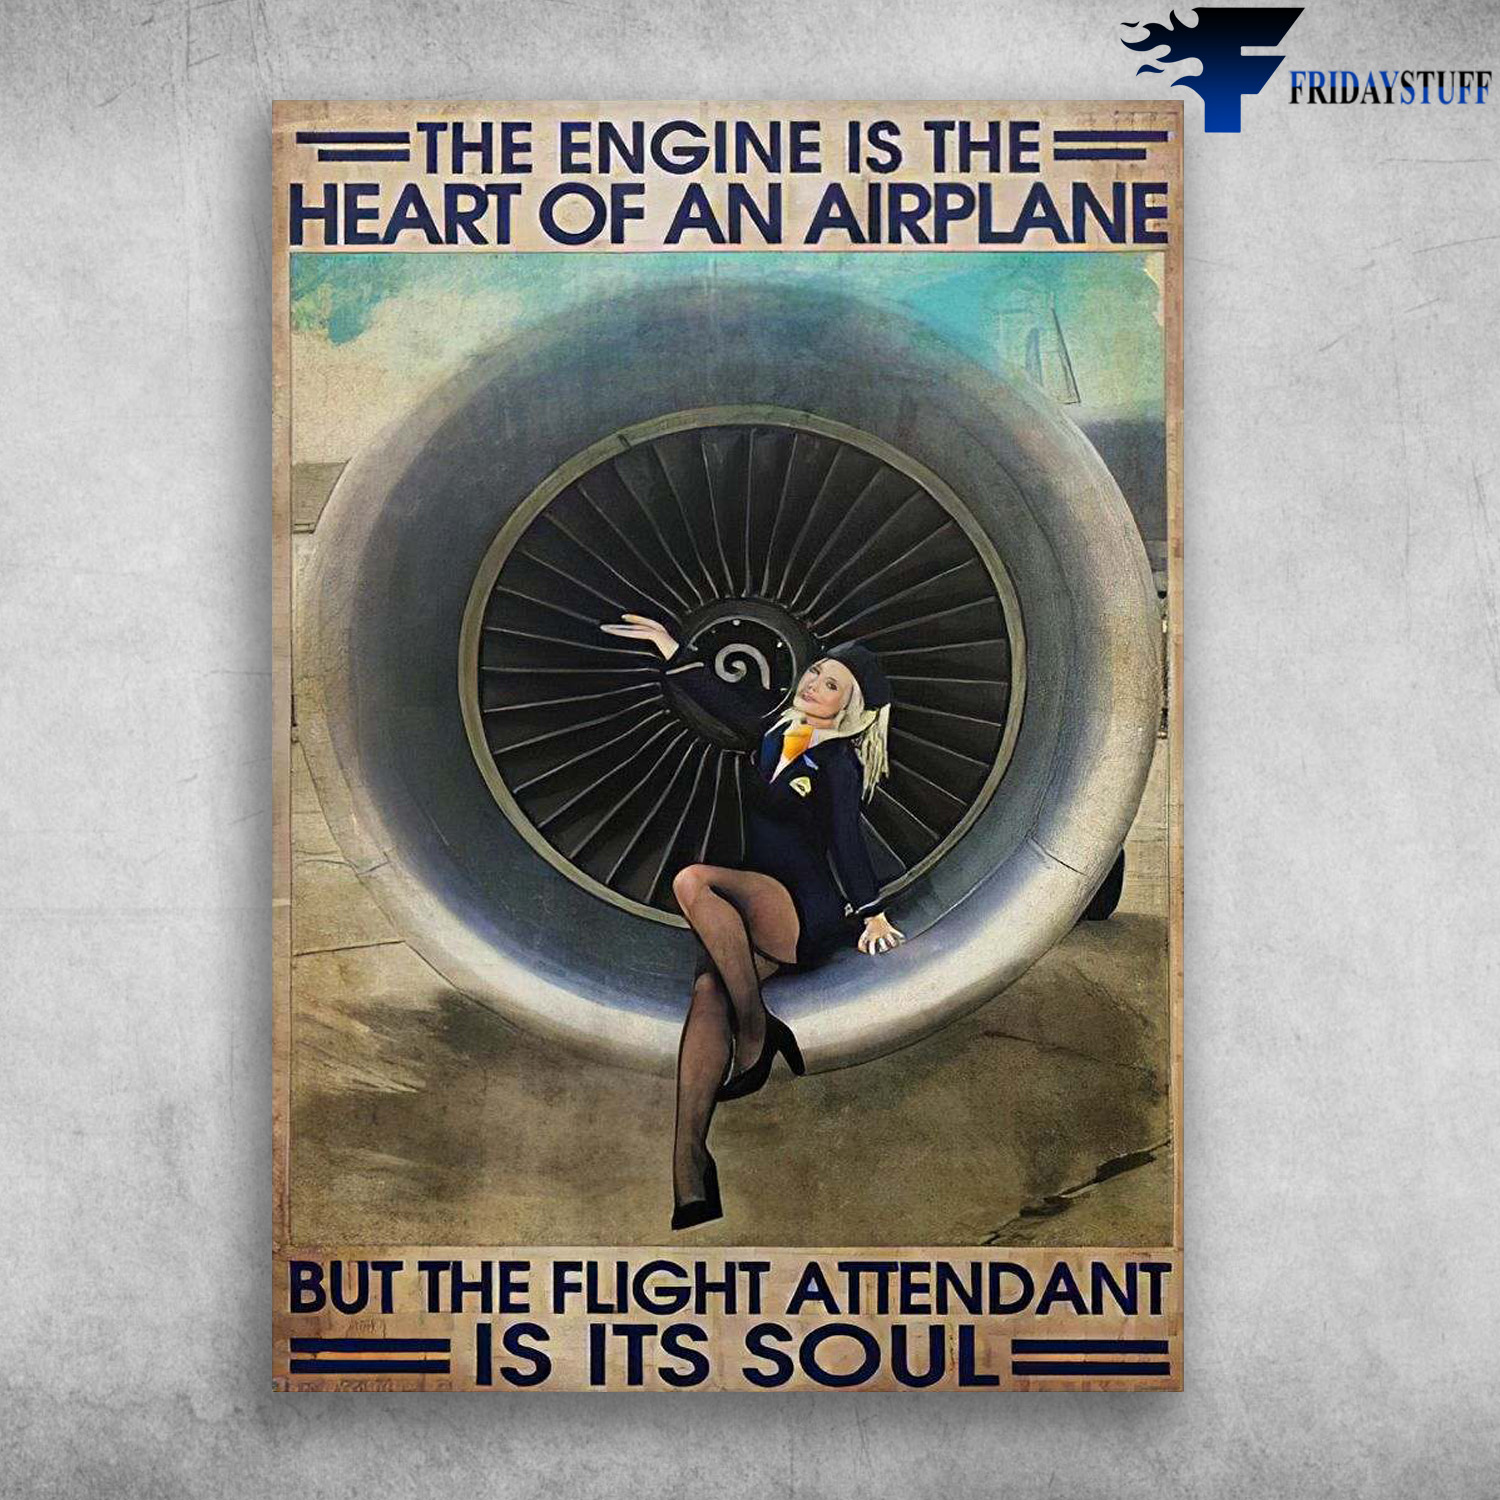 Flight Attendant - Woman Airplane, The Engine Is The Heart Of Airplane, But The Flight Attendants Is Its Soul